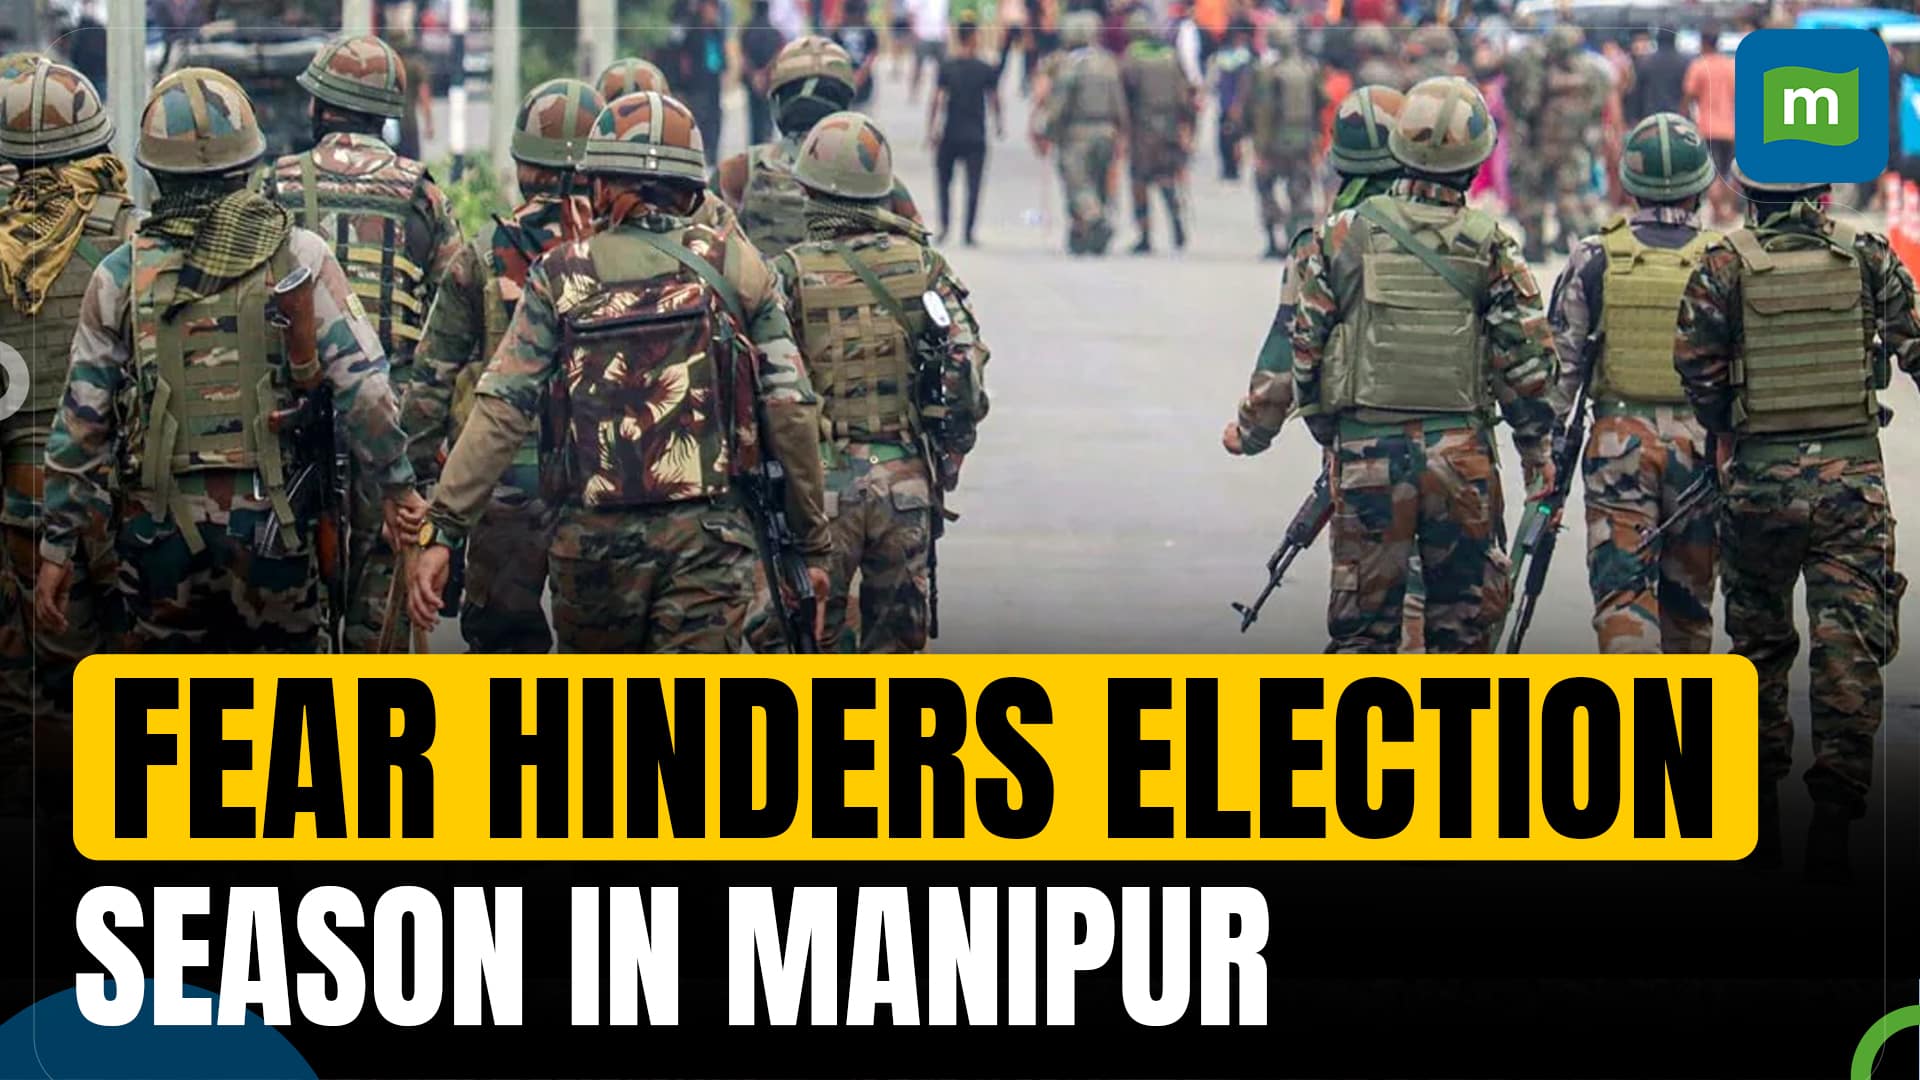 Manipur: Election campaigning being held behind closed doors due to fear of violence